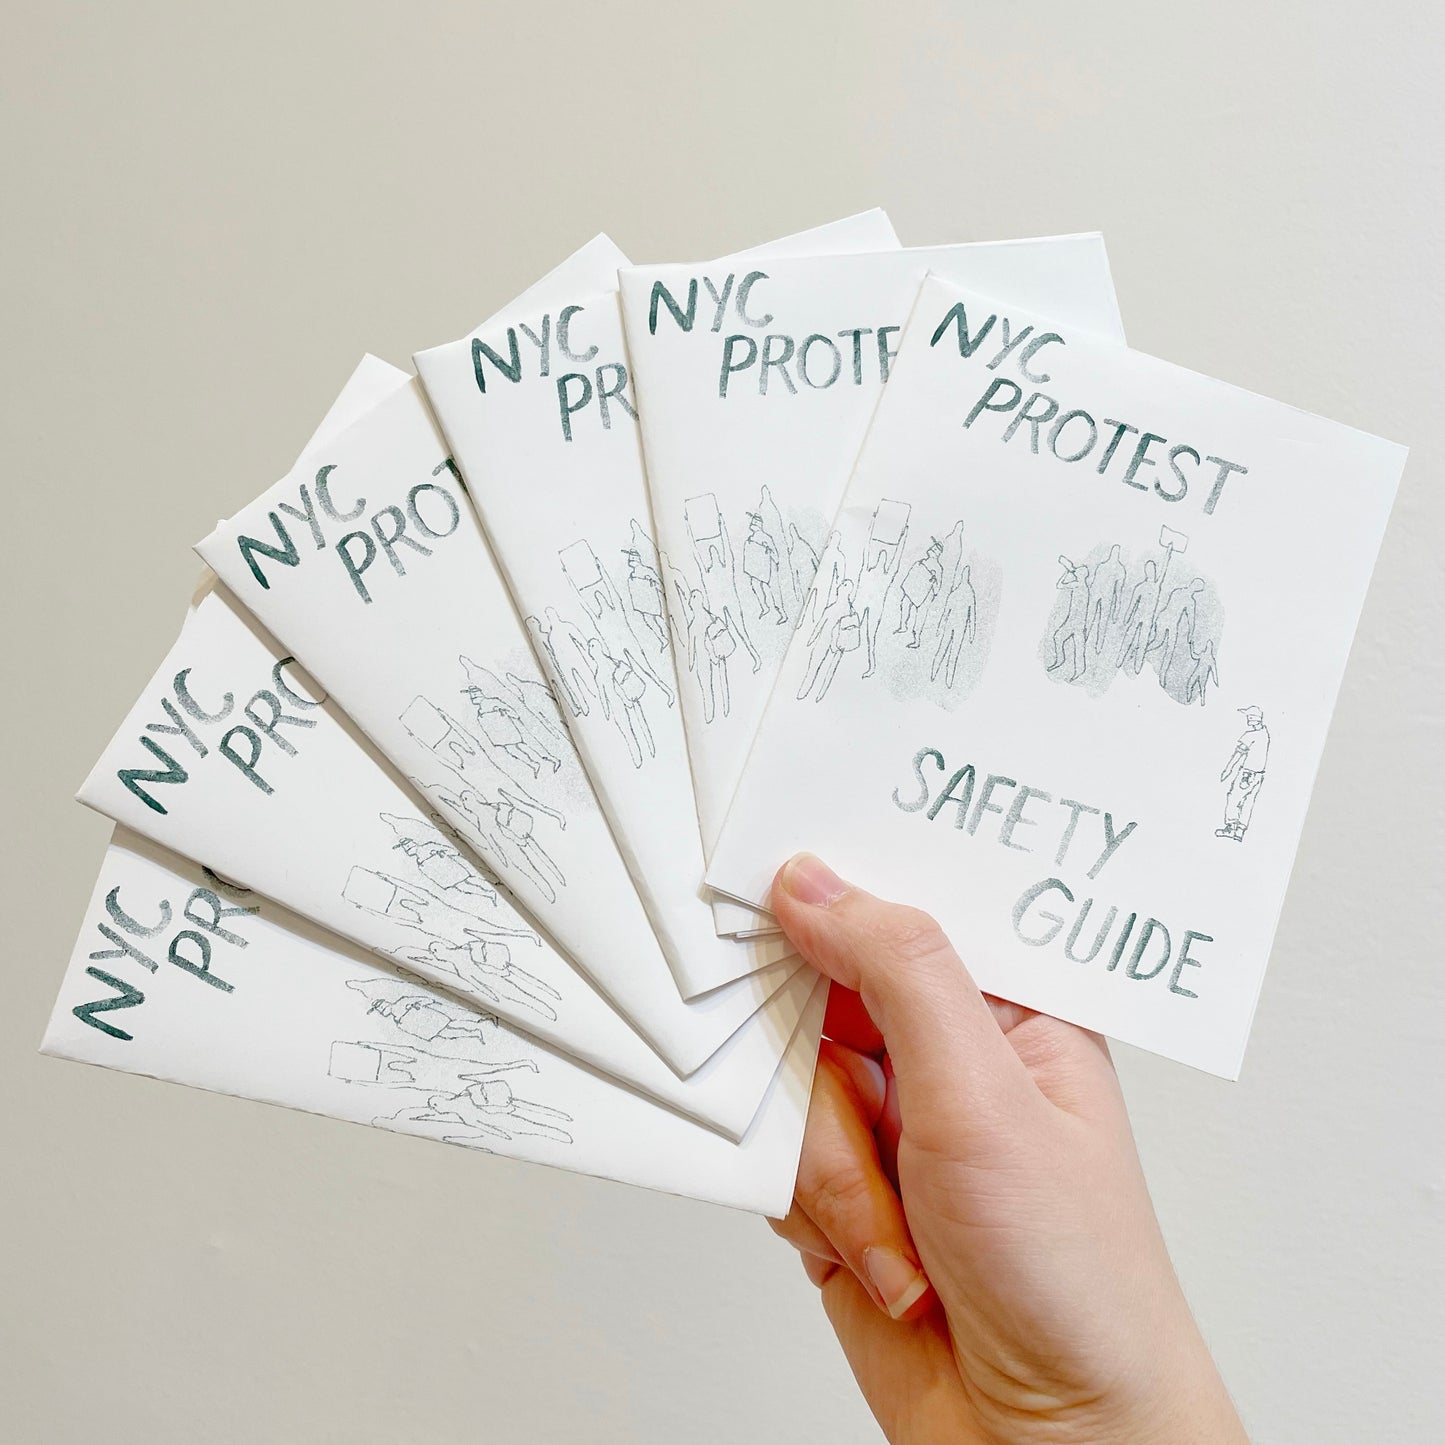 Jia Sung: NYC Protest Safety Guide Zine